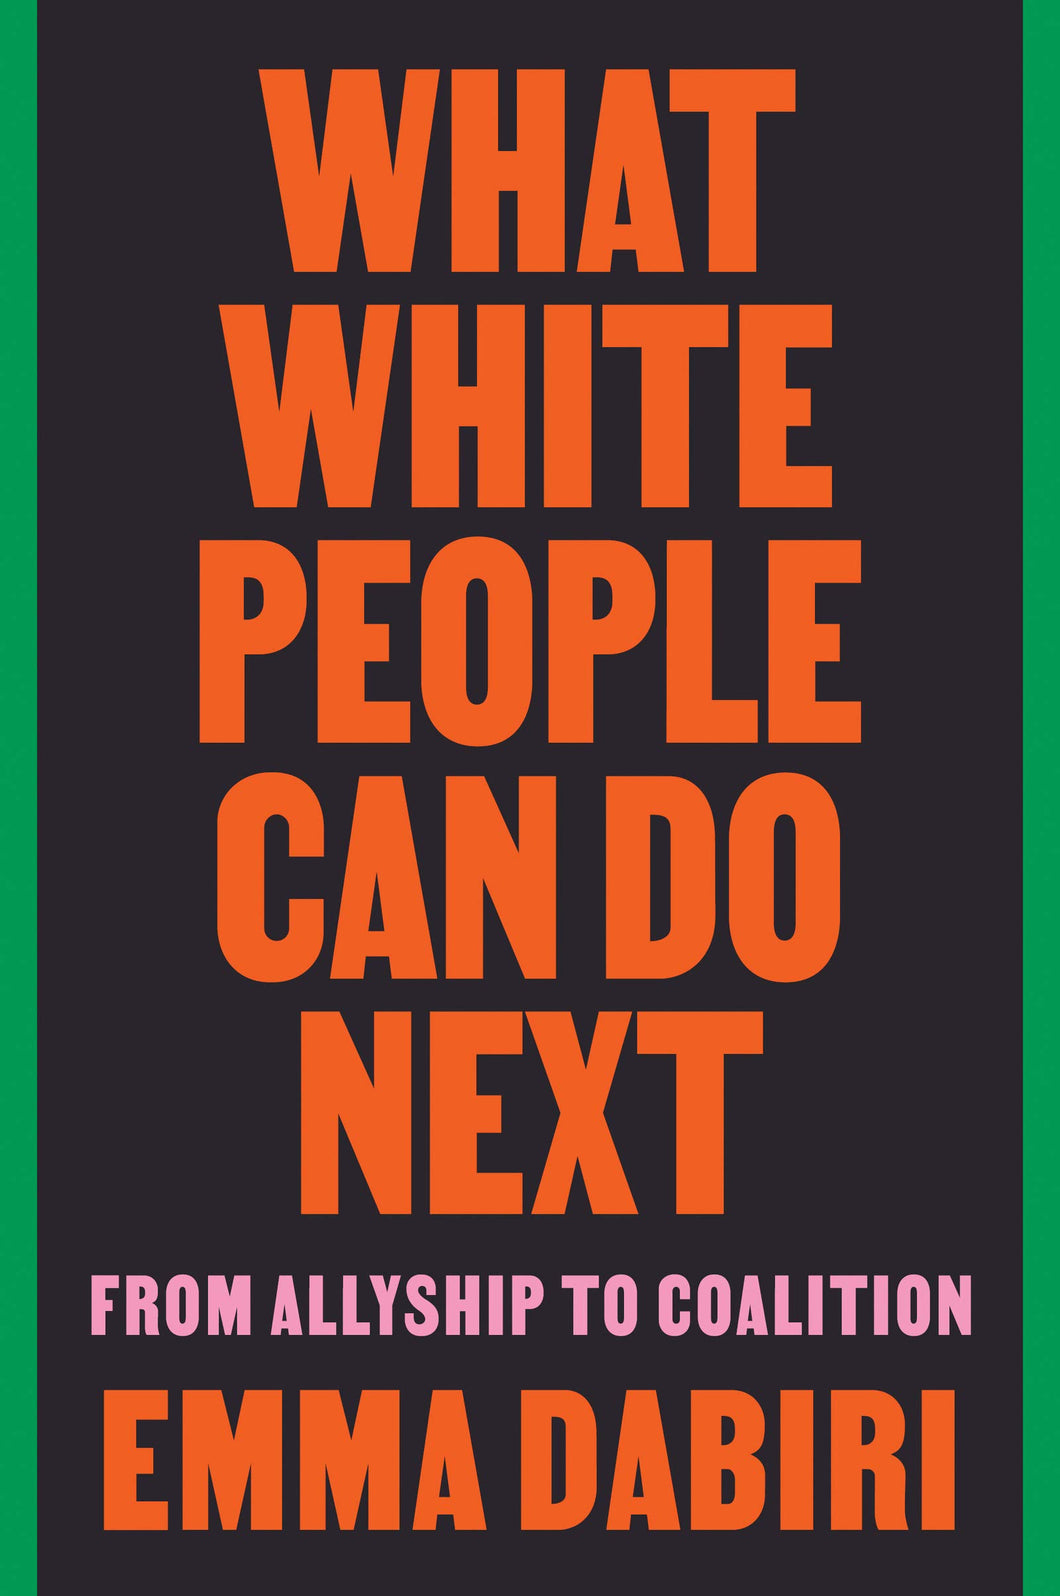 What White People Can Do Next: From Allyship to Coalition [Emma Dabiri]